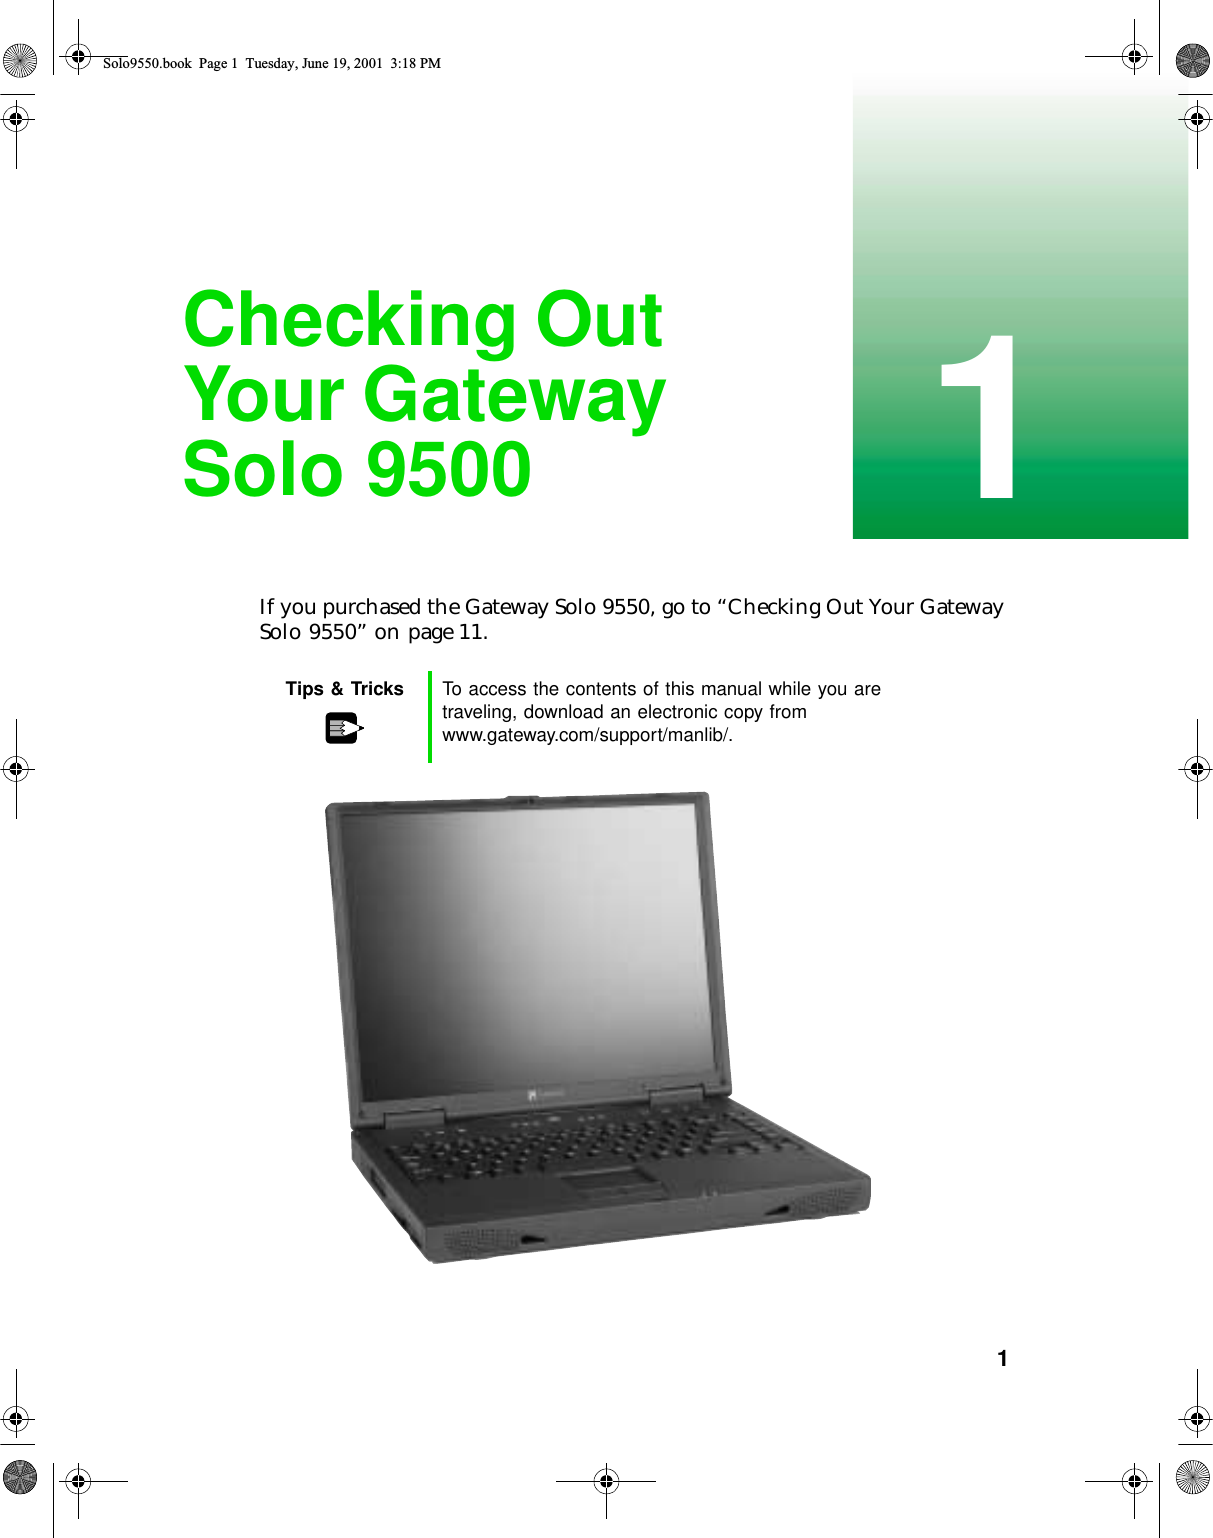           11Checking Out Your Gateway Solo 9500If you purchased the Gateway Solo 9550, go to “Checking Out Your Gateway Solo 9550” on page 11.Tips &amp; Tricks To access the contents of this manual while you are traveling, download an electronic copy from www.gateway.com/support/manlib/.Solo9550.book Page 1 Tuesday, June 19, 2001 3:18 PM